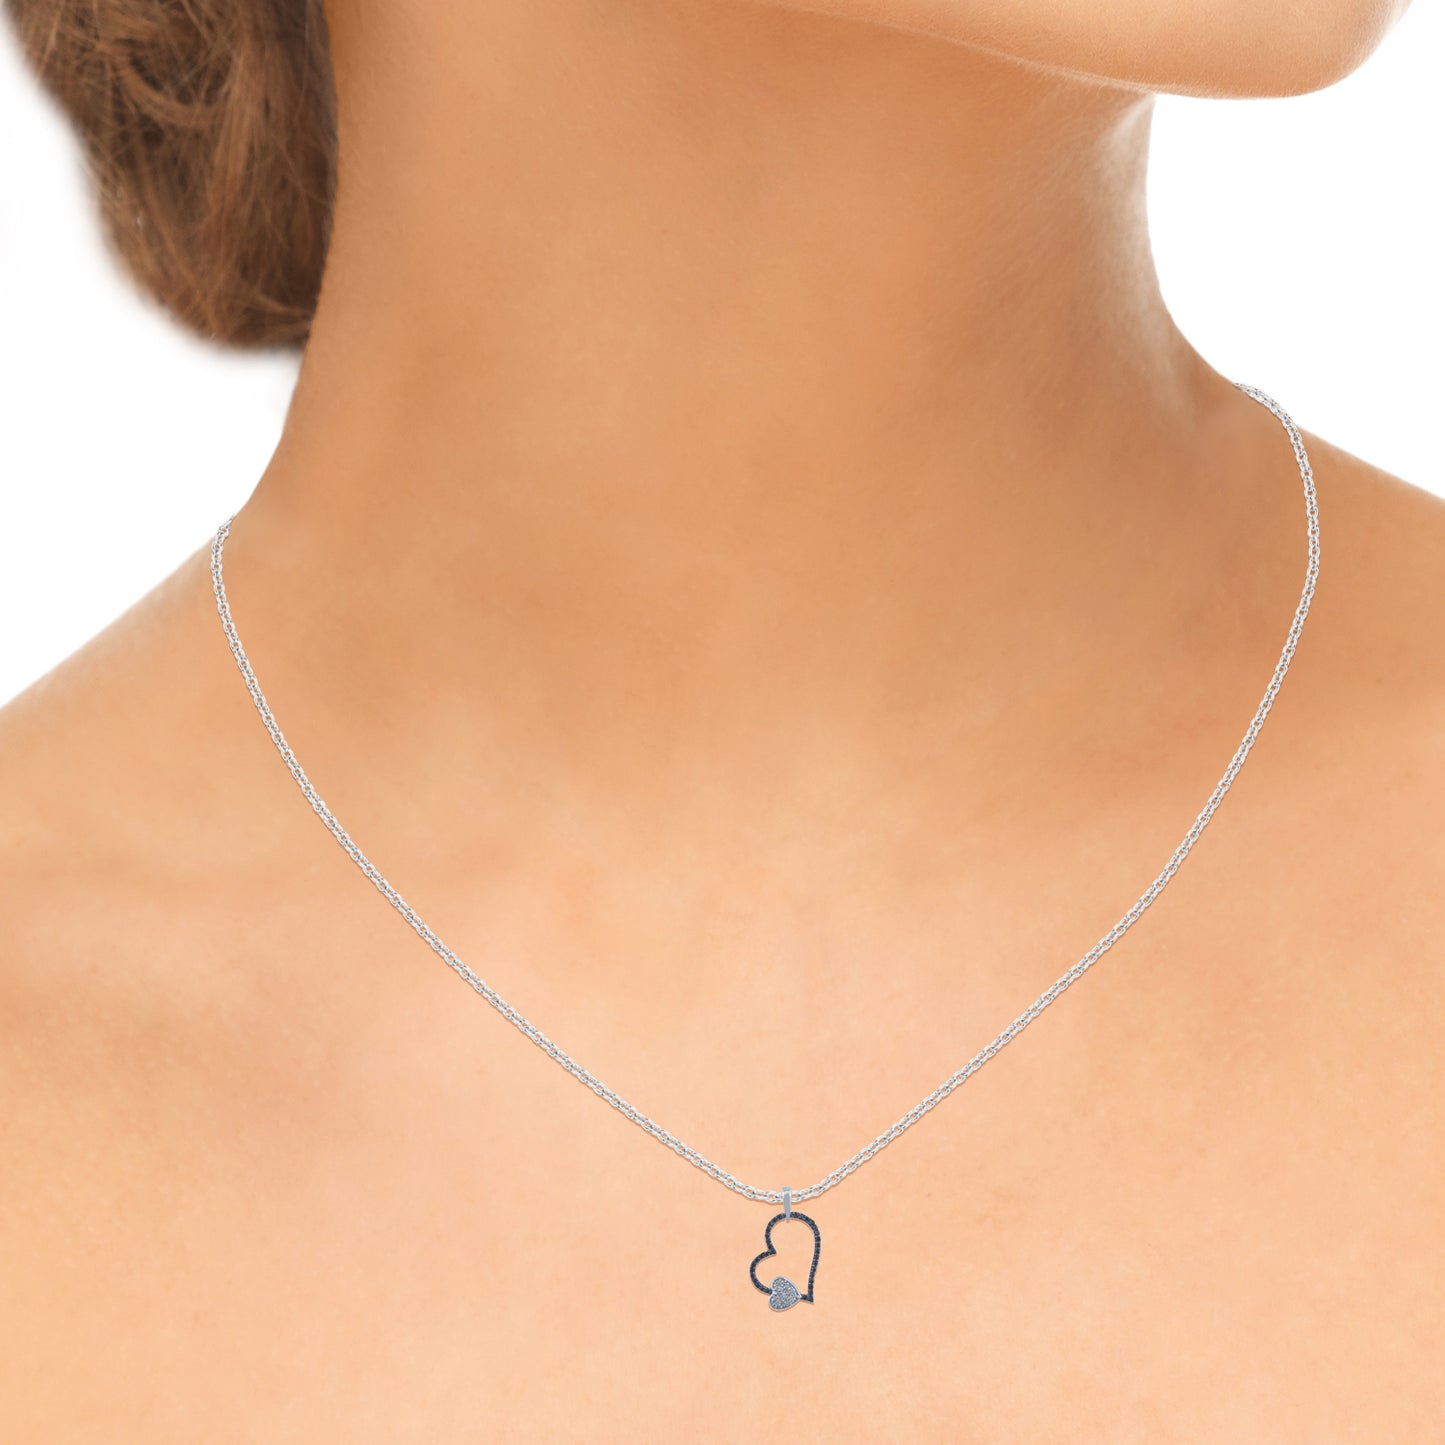 Treated Black Diamond Double Heart Pendant Necklace in 10k White Gold